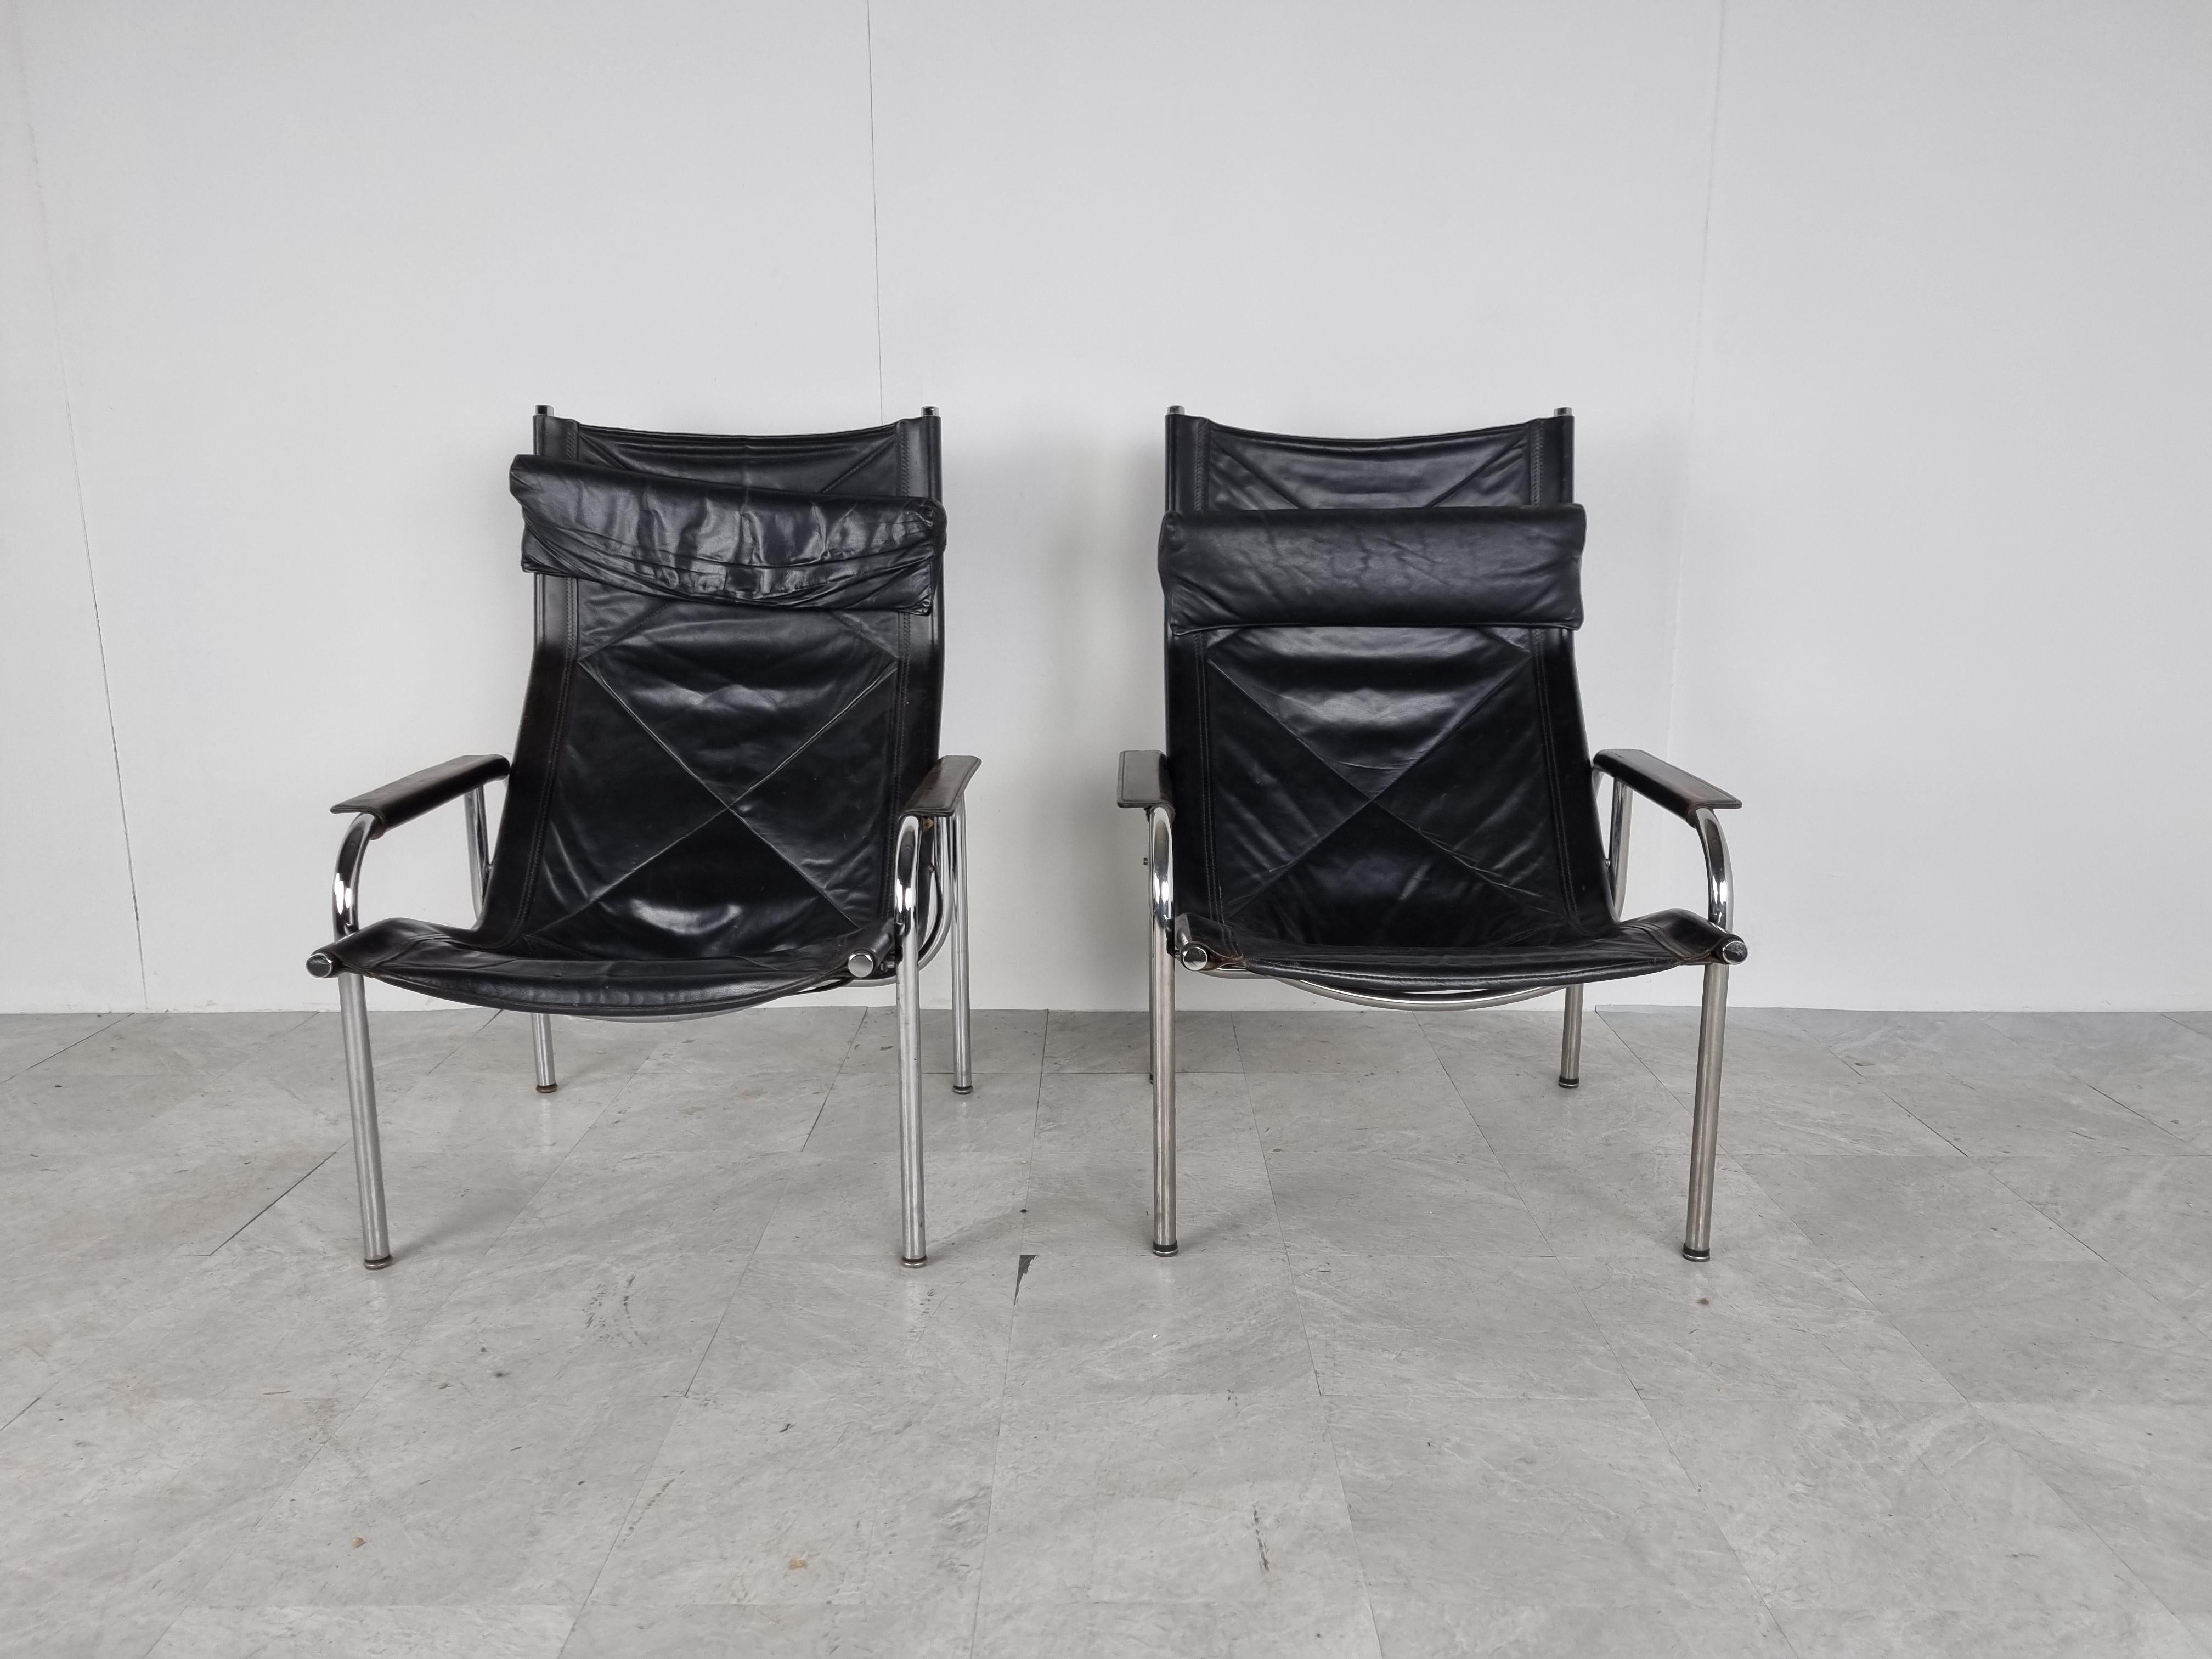 Pair of mid century black leather and chromed tubular metal easychairs designed by Hans Eichenberger and produced by Strassle international.

Beautiful timeless design.

Very good condition with normal age related patina

The Swiss